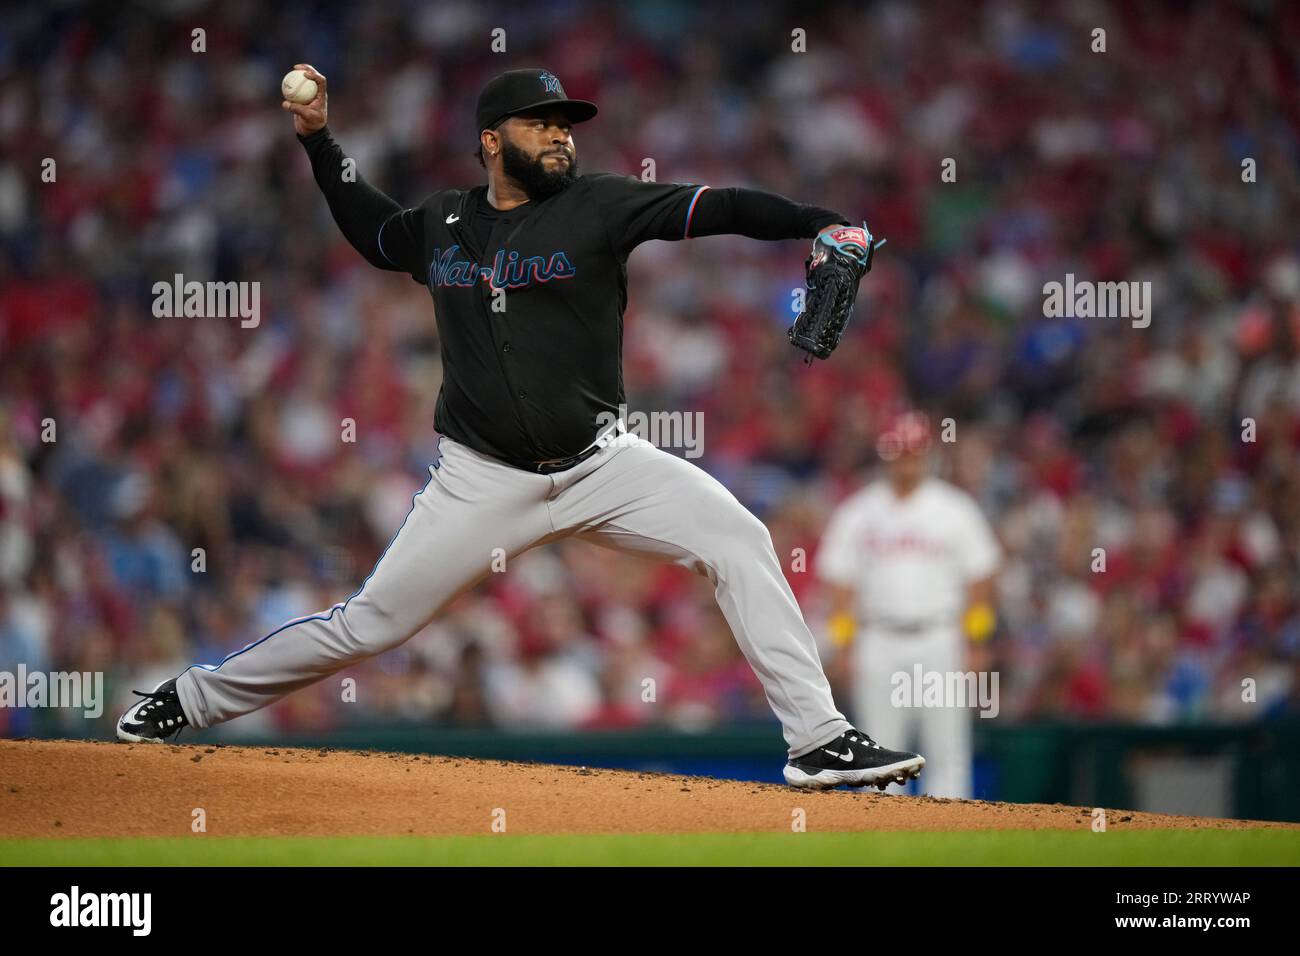 Miami Marlins' Johnny Cueto pitches during the second inning of a